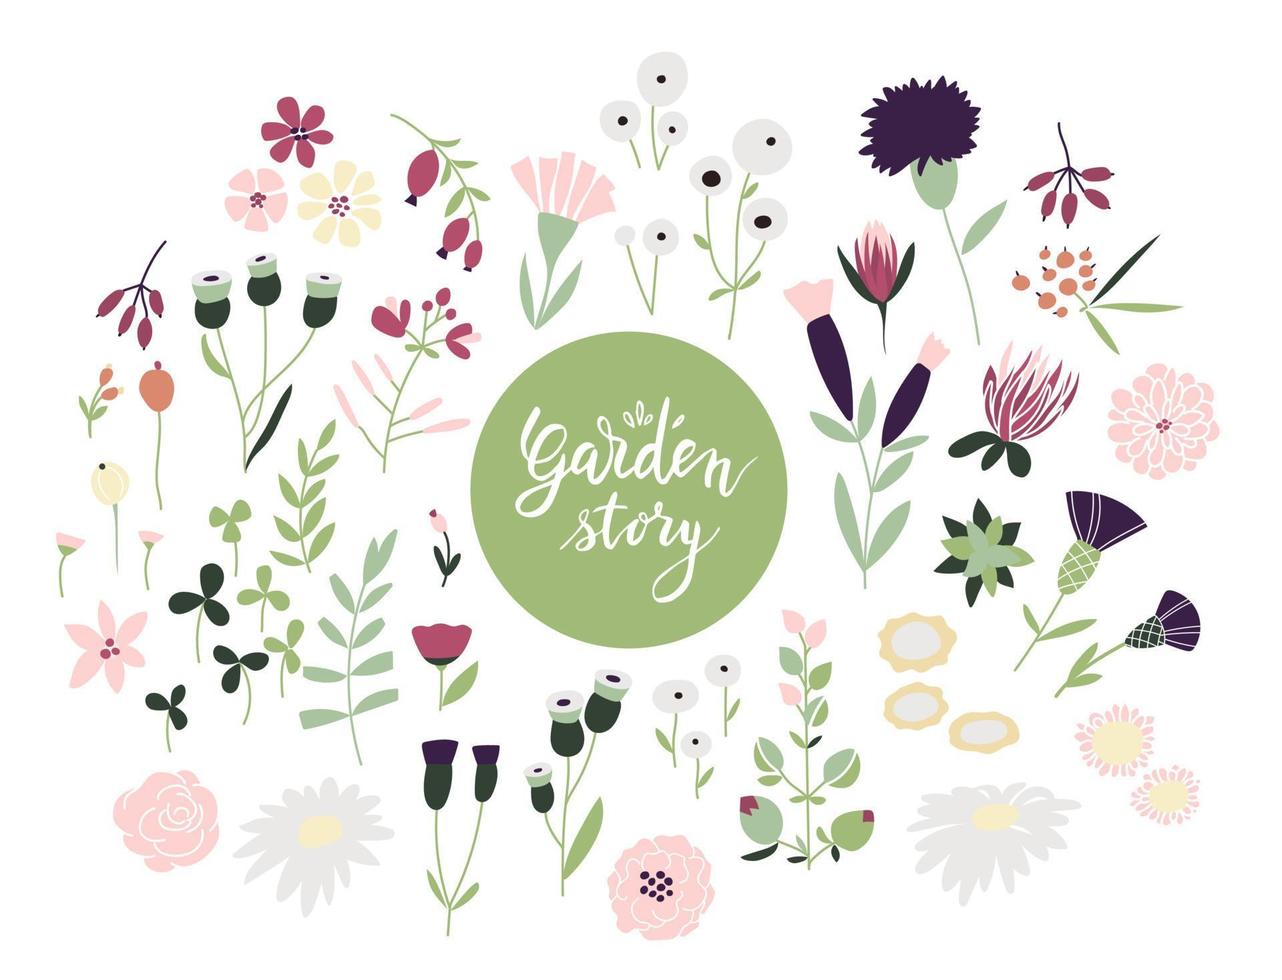 Spring floral decorative elements, flowers and plants illustration vector